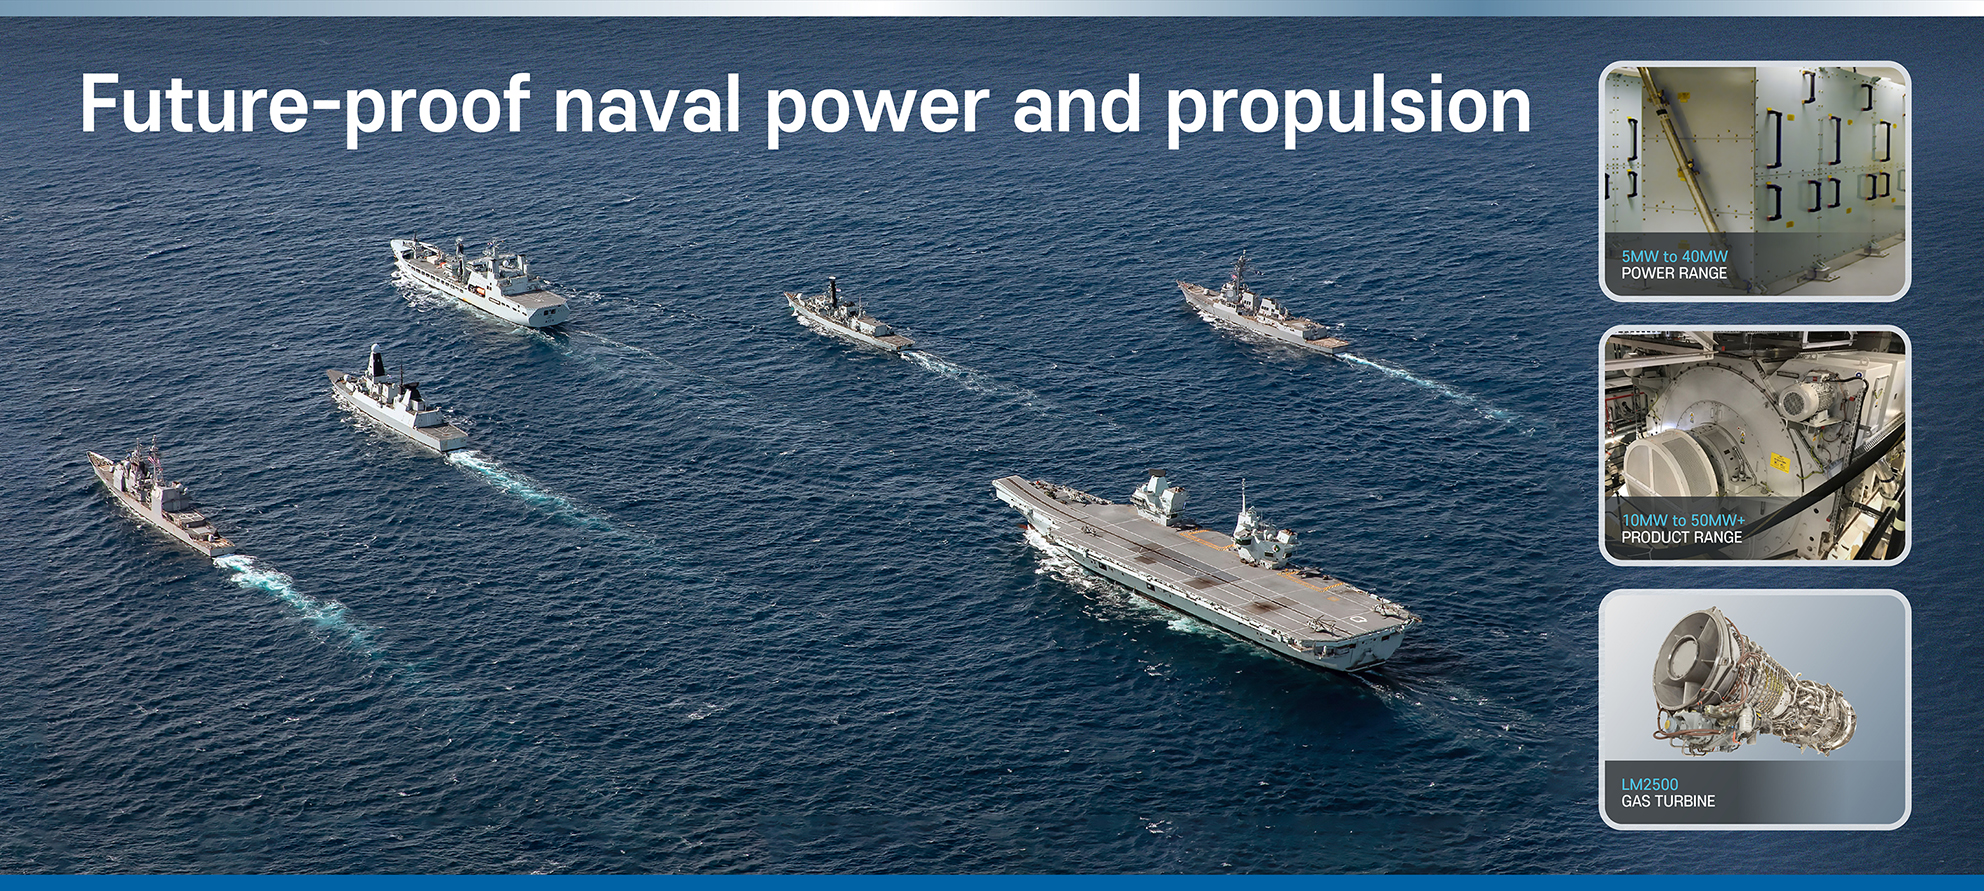 Future-proof naval power and propulsion